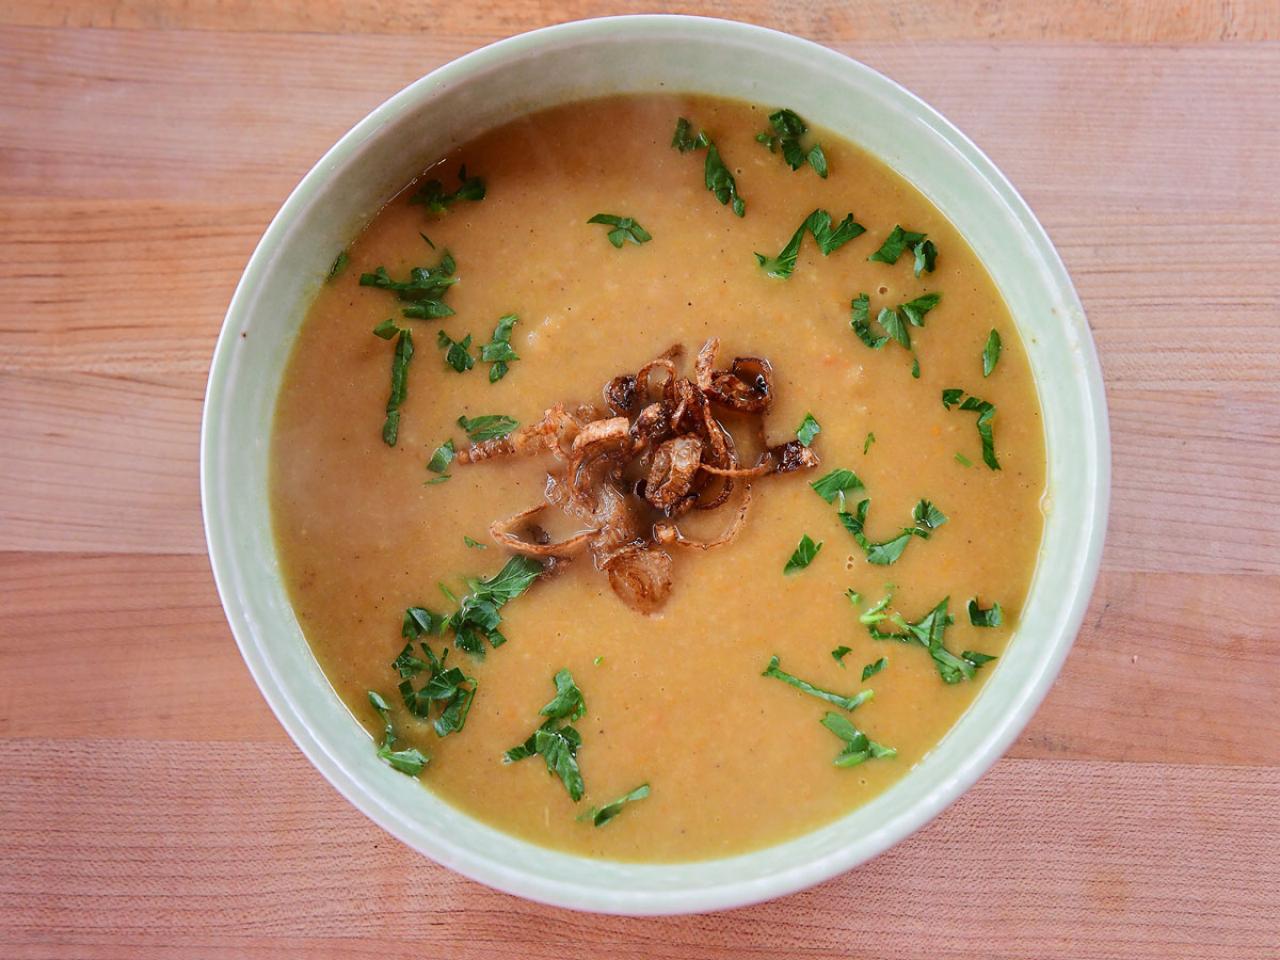 Easy German Carrot Soup Recipe: Oma's Mohrrübensuppe (Karottensuppe)